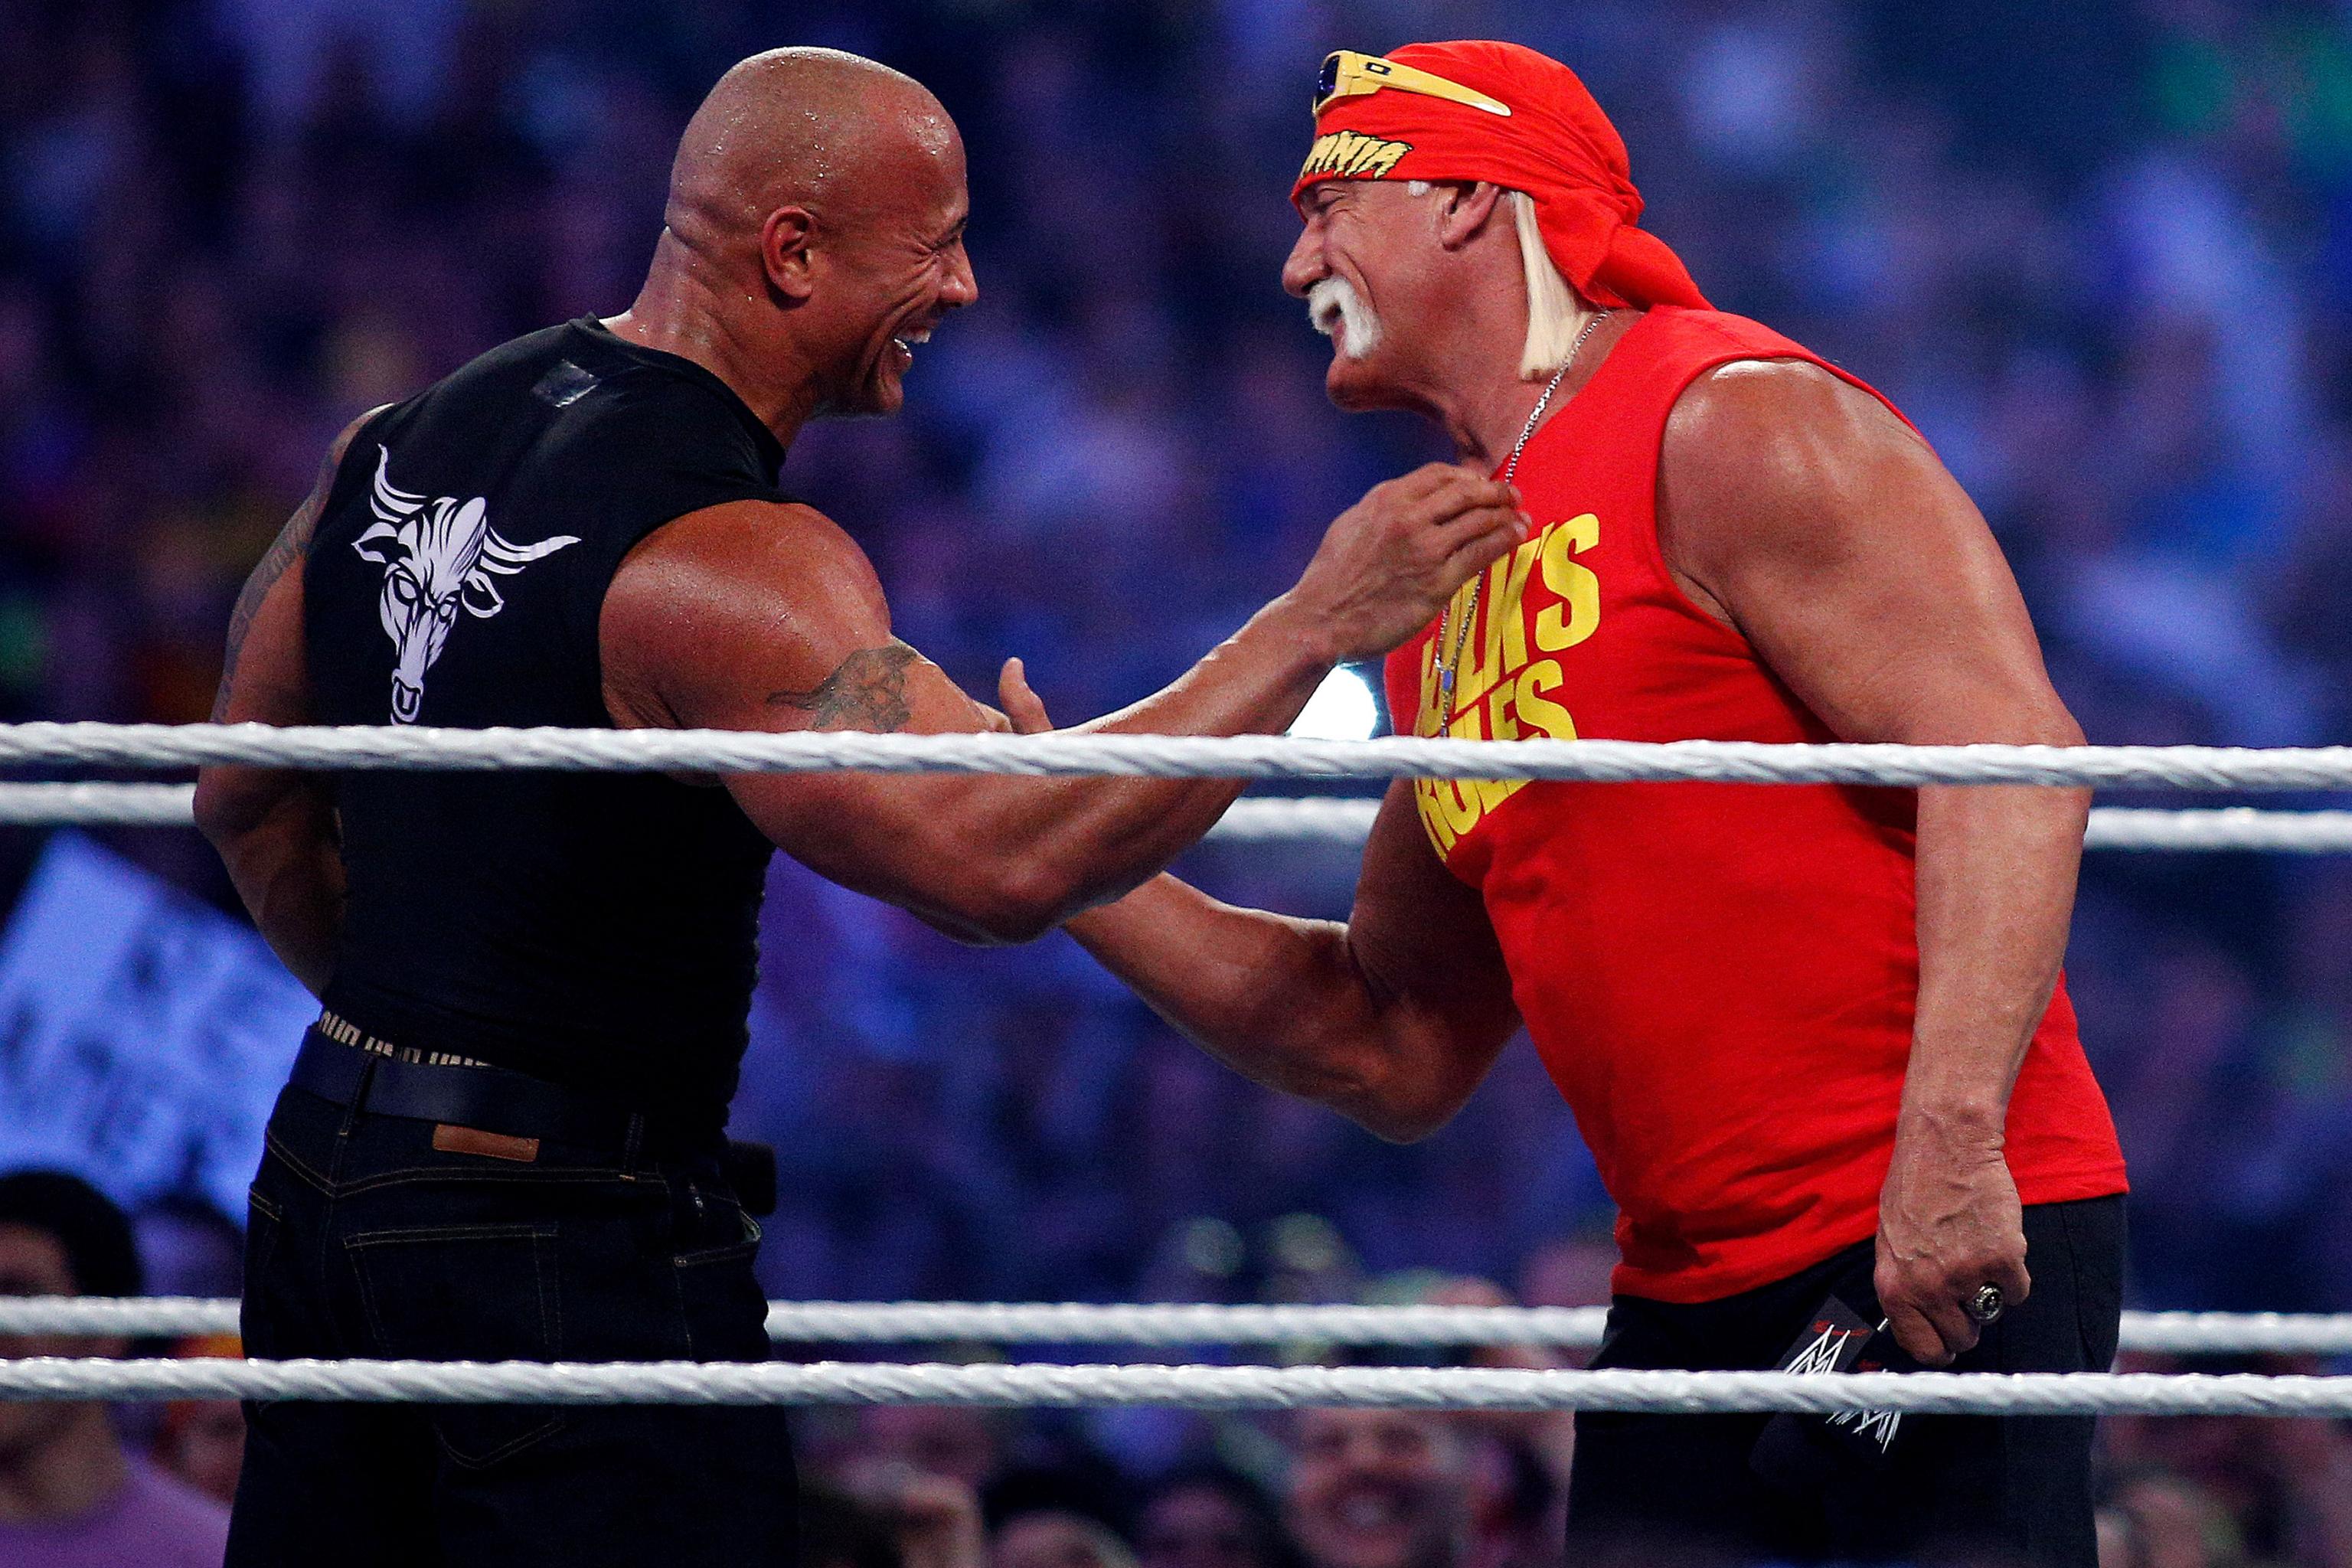 The Rock Issues Statement on Hulk Hogan's Controversial Tirade | Bleacher Report Latest News, Videos and Highlights